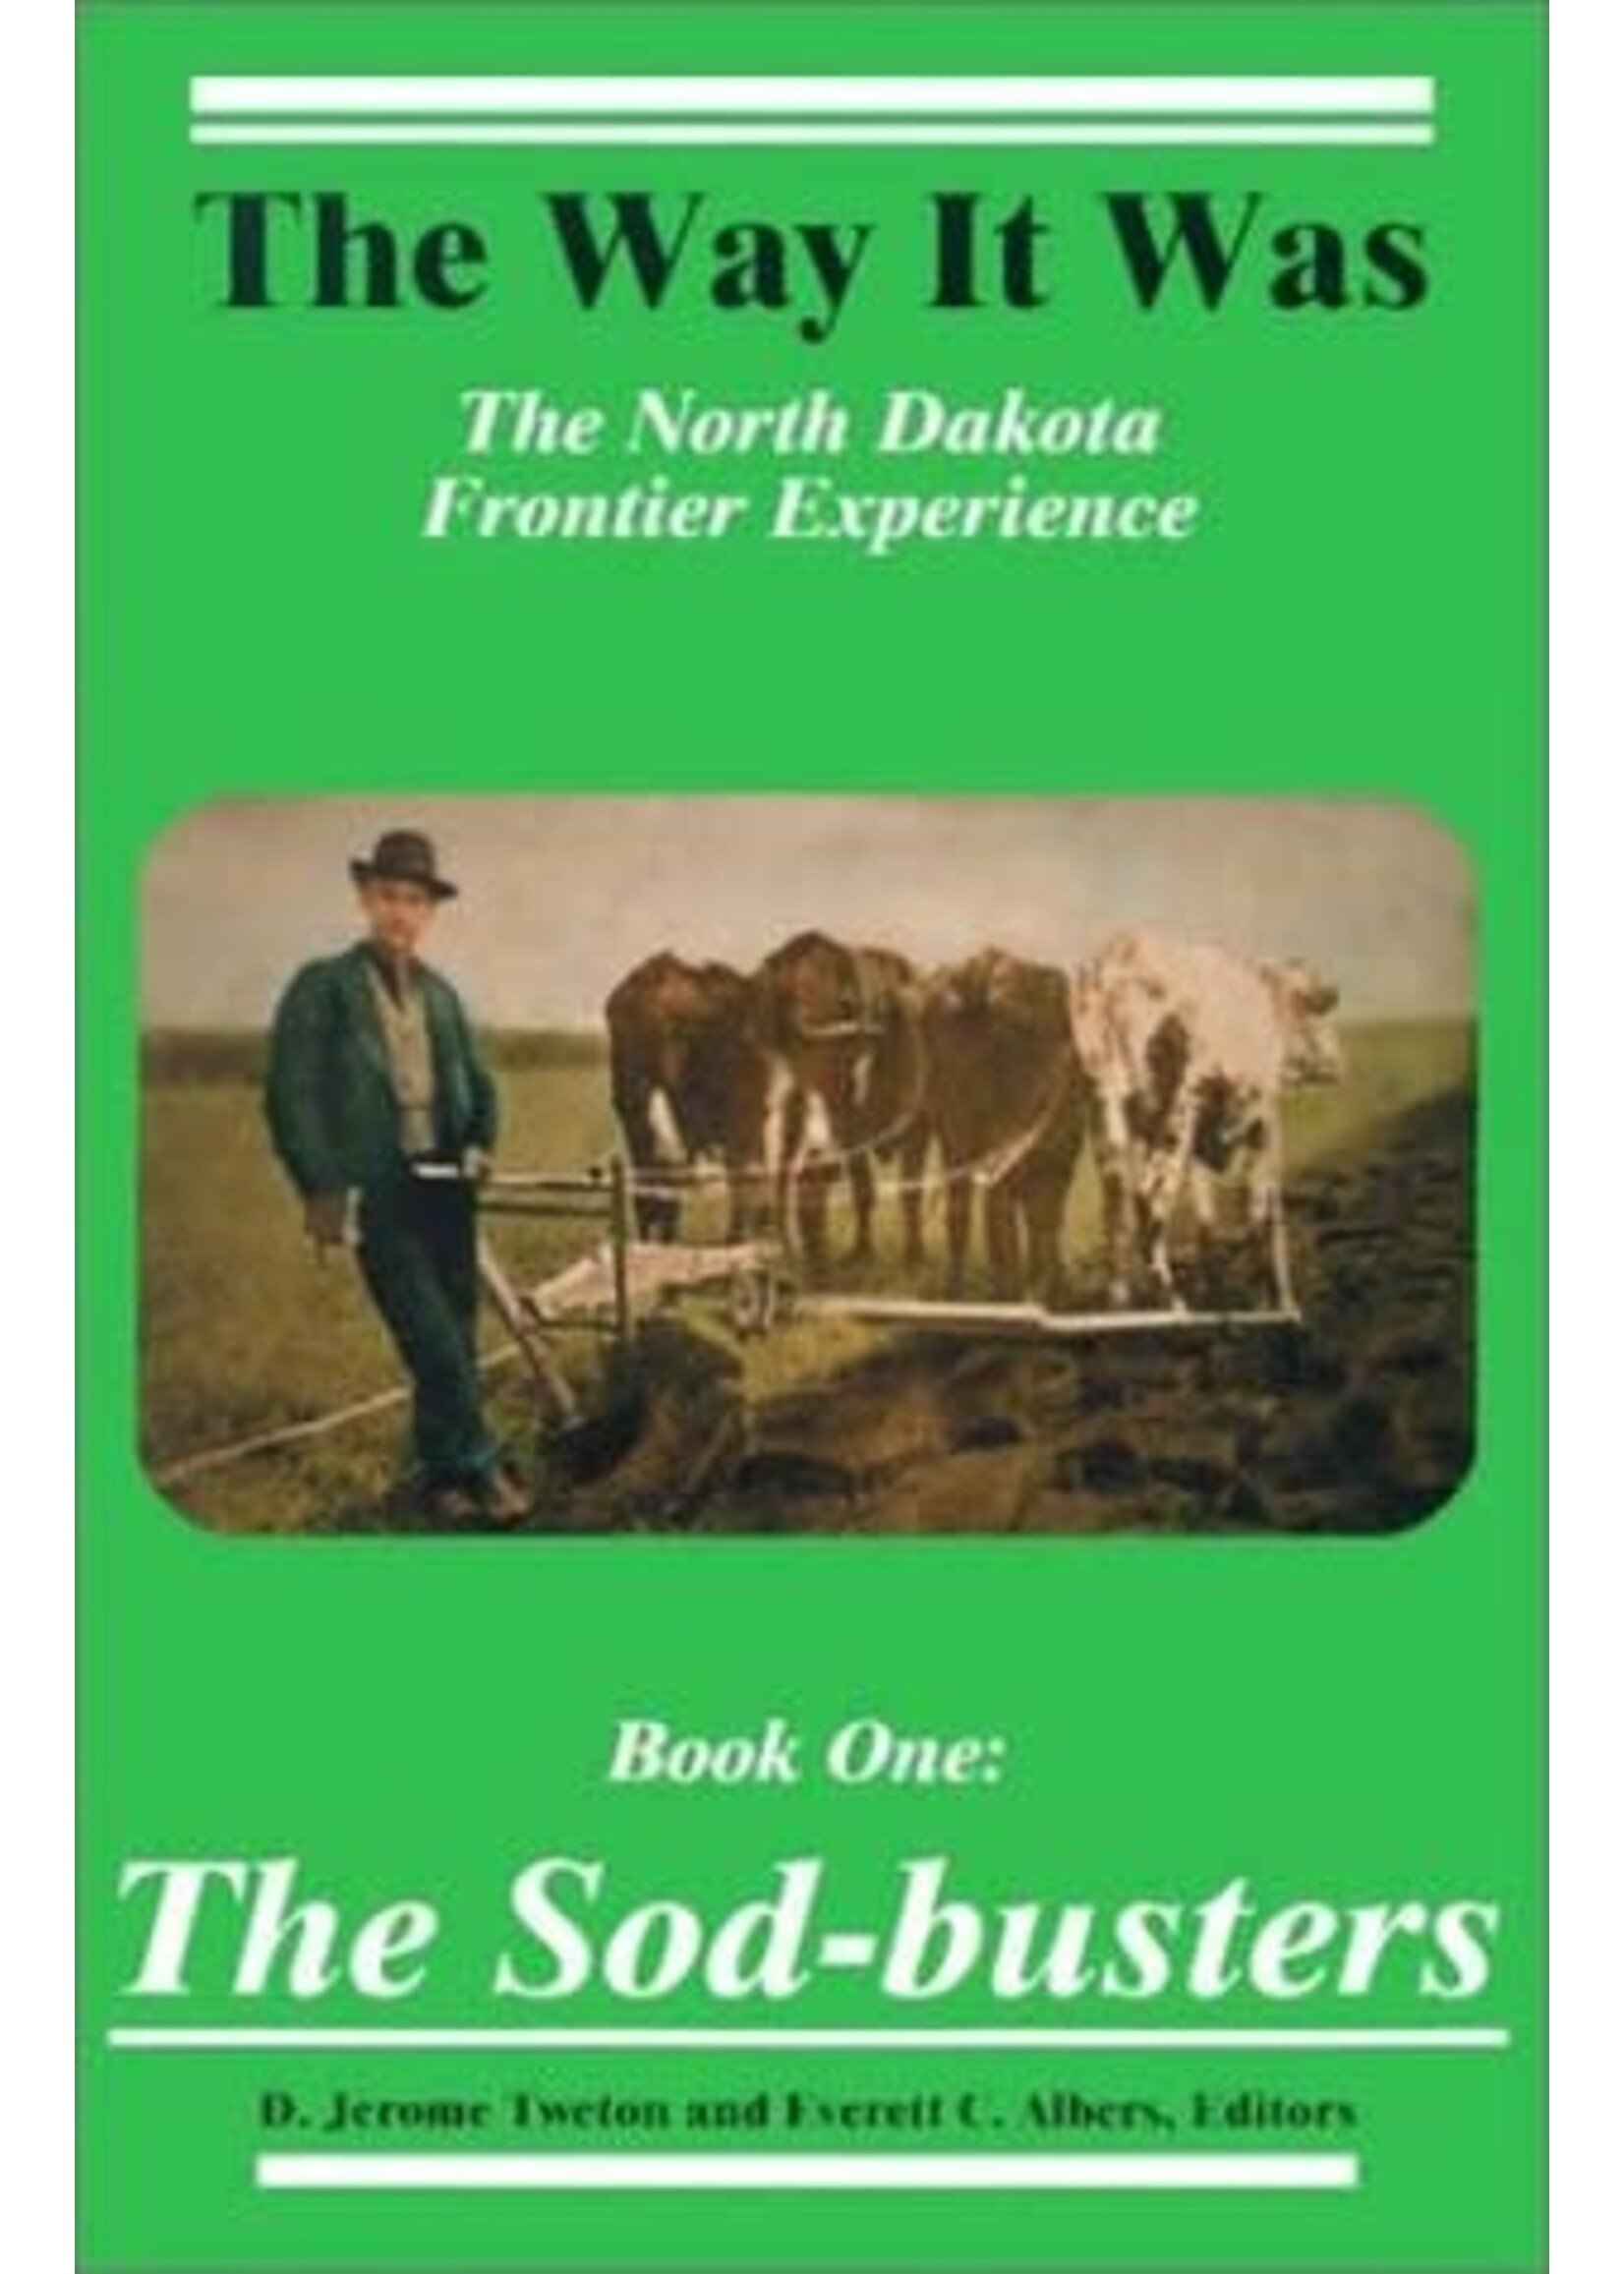 The Way it Was: The North Dakota Frontier Experience: The Sod-busters